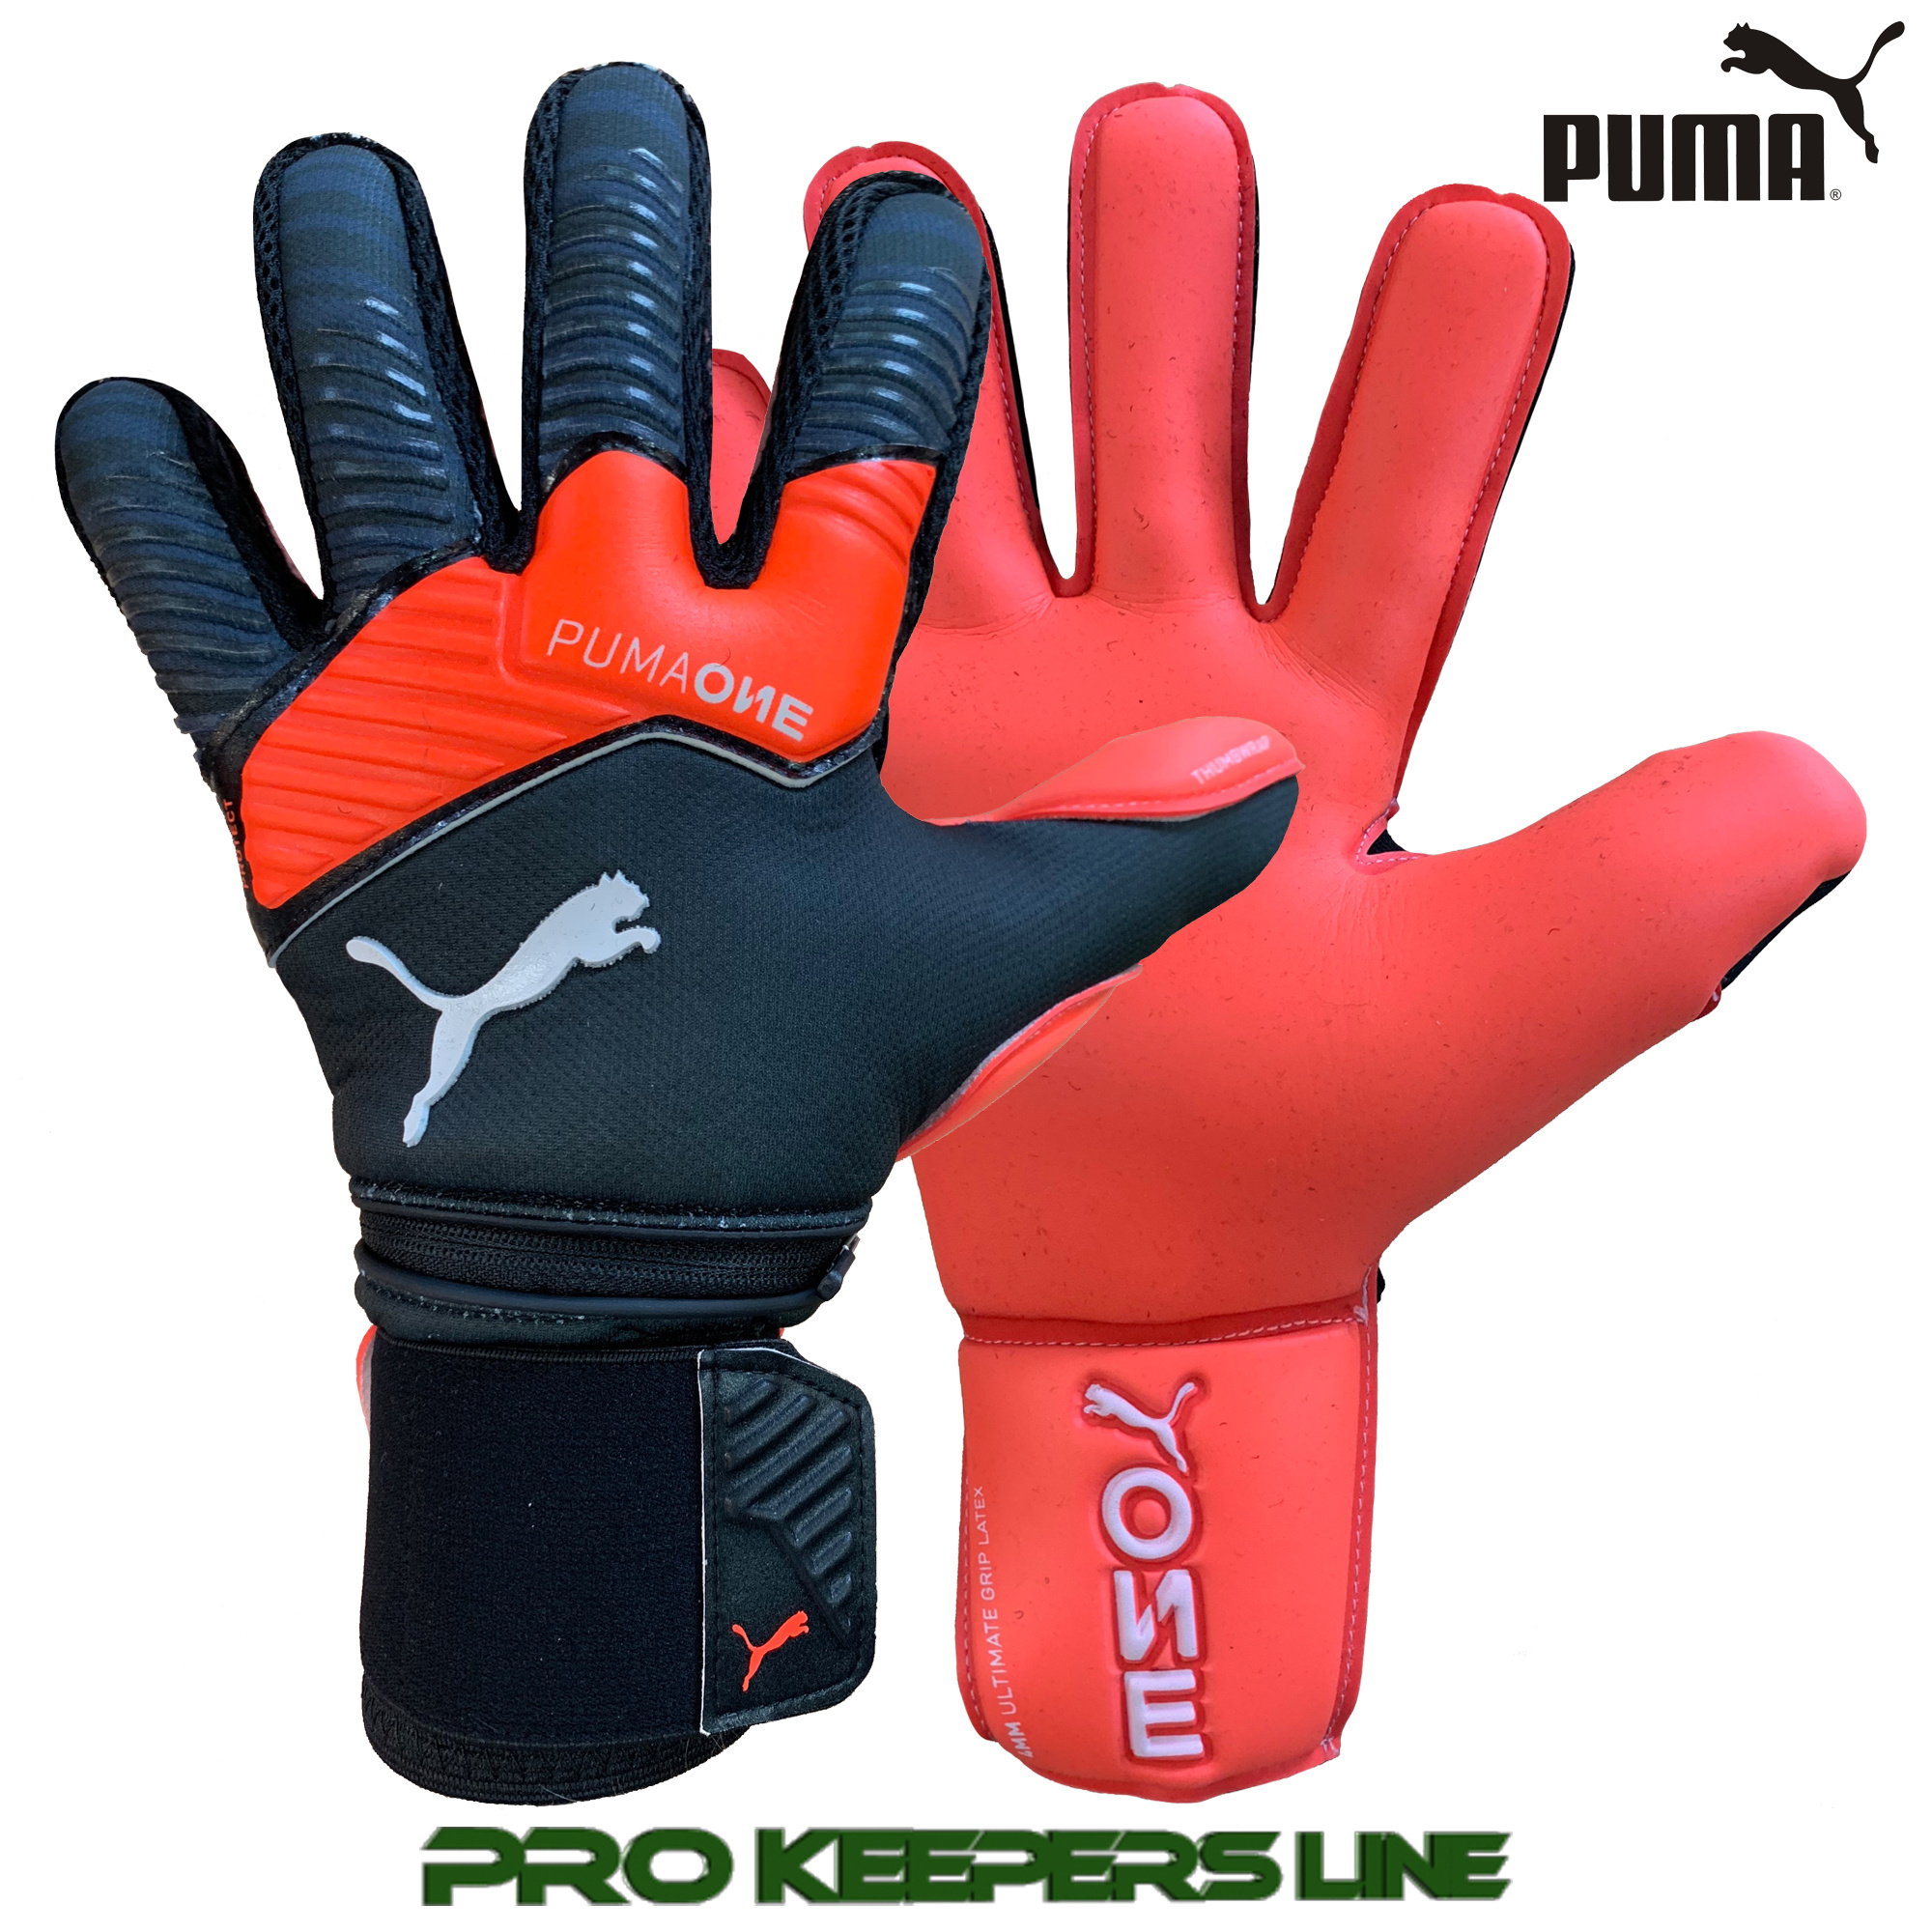 puma one protect 1 review